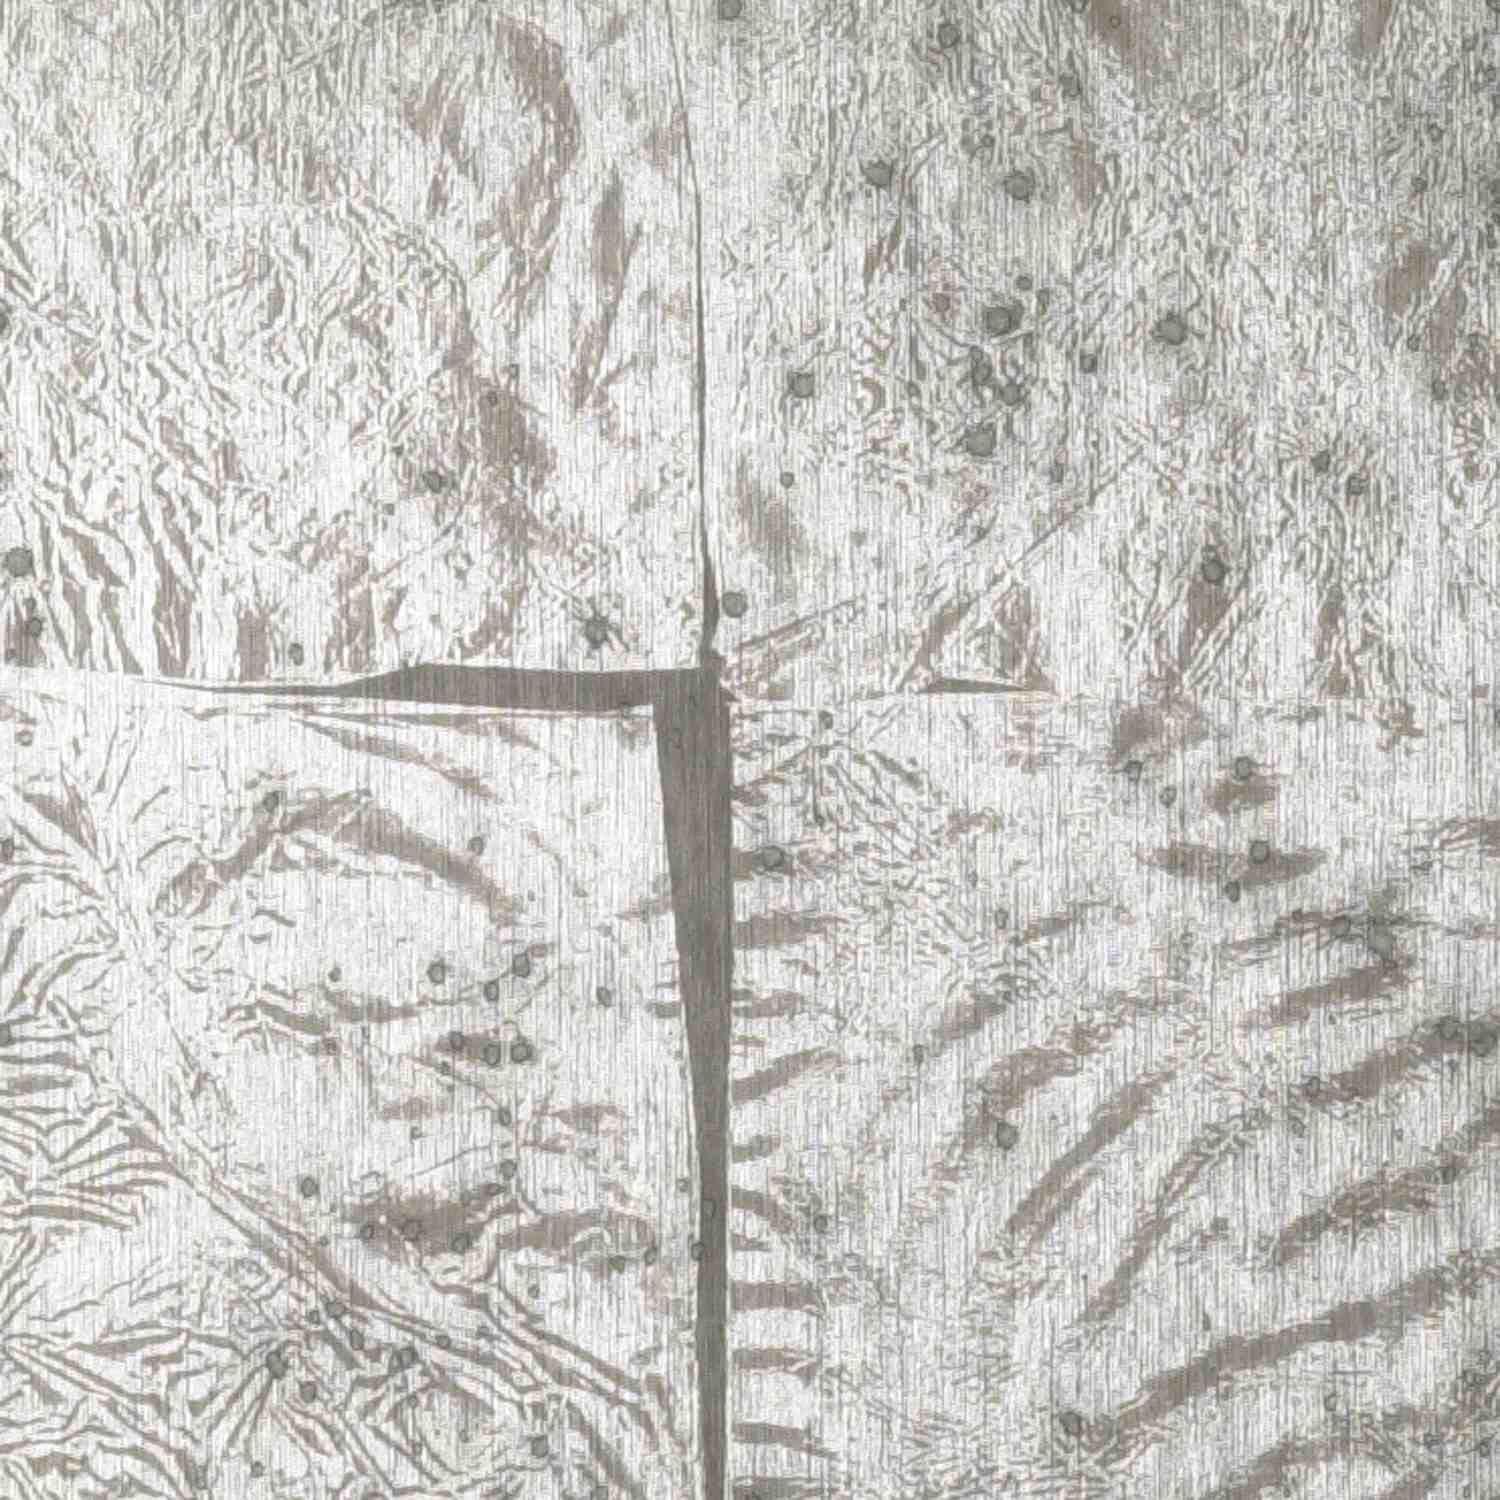 Aged Patina Silver & Gold Metals Designer Wallcoverings - Your